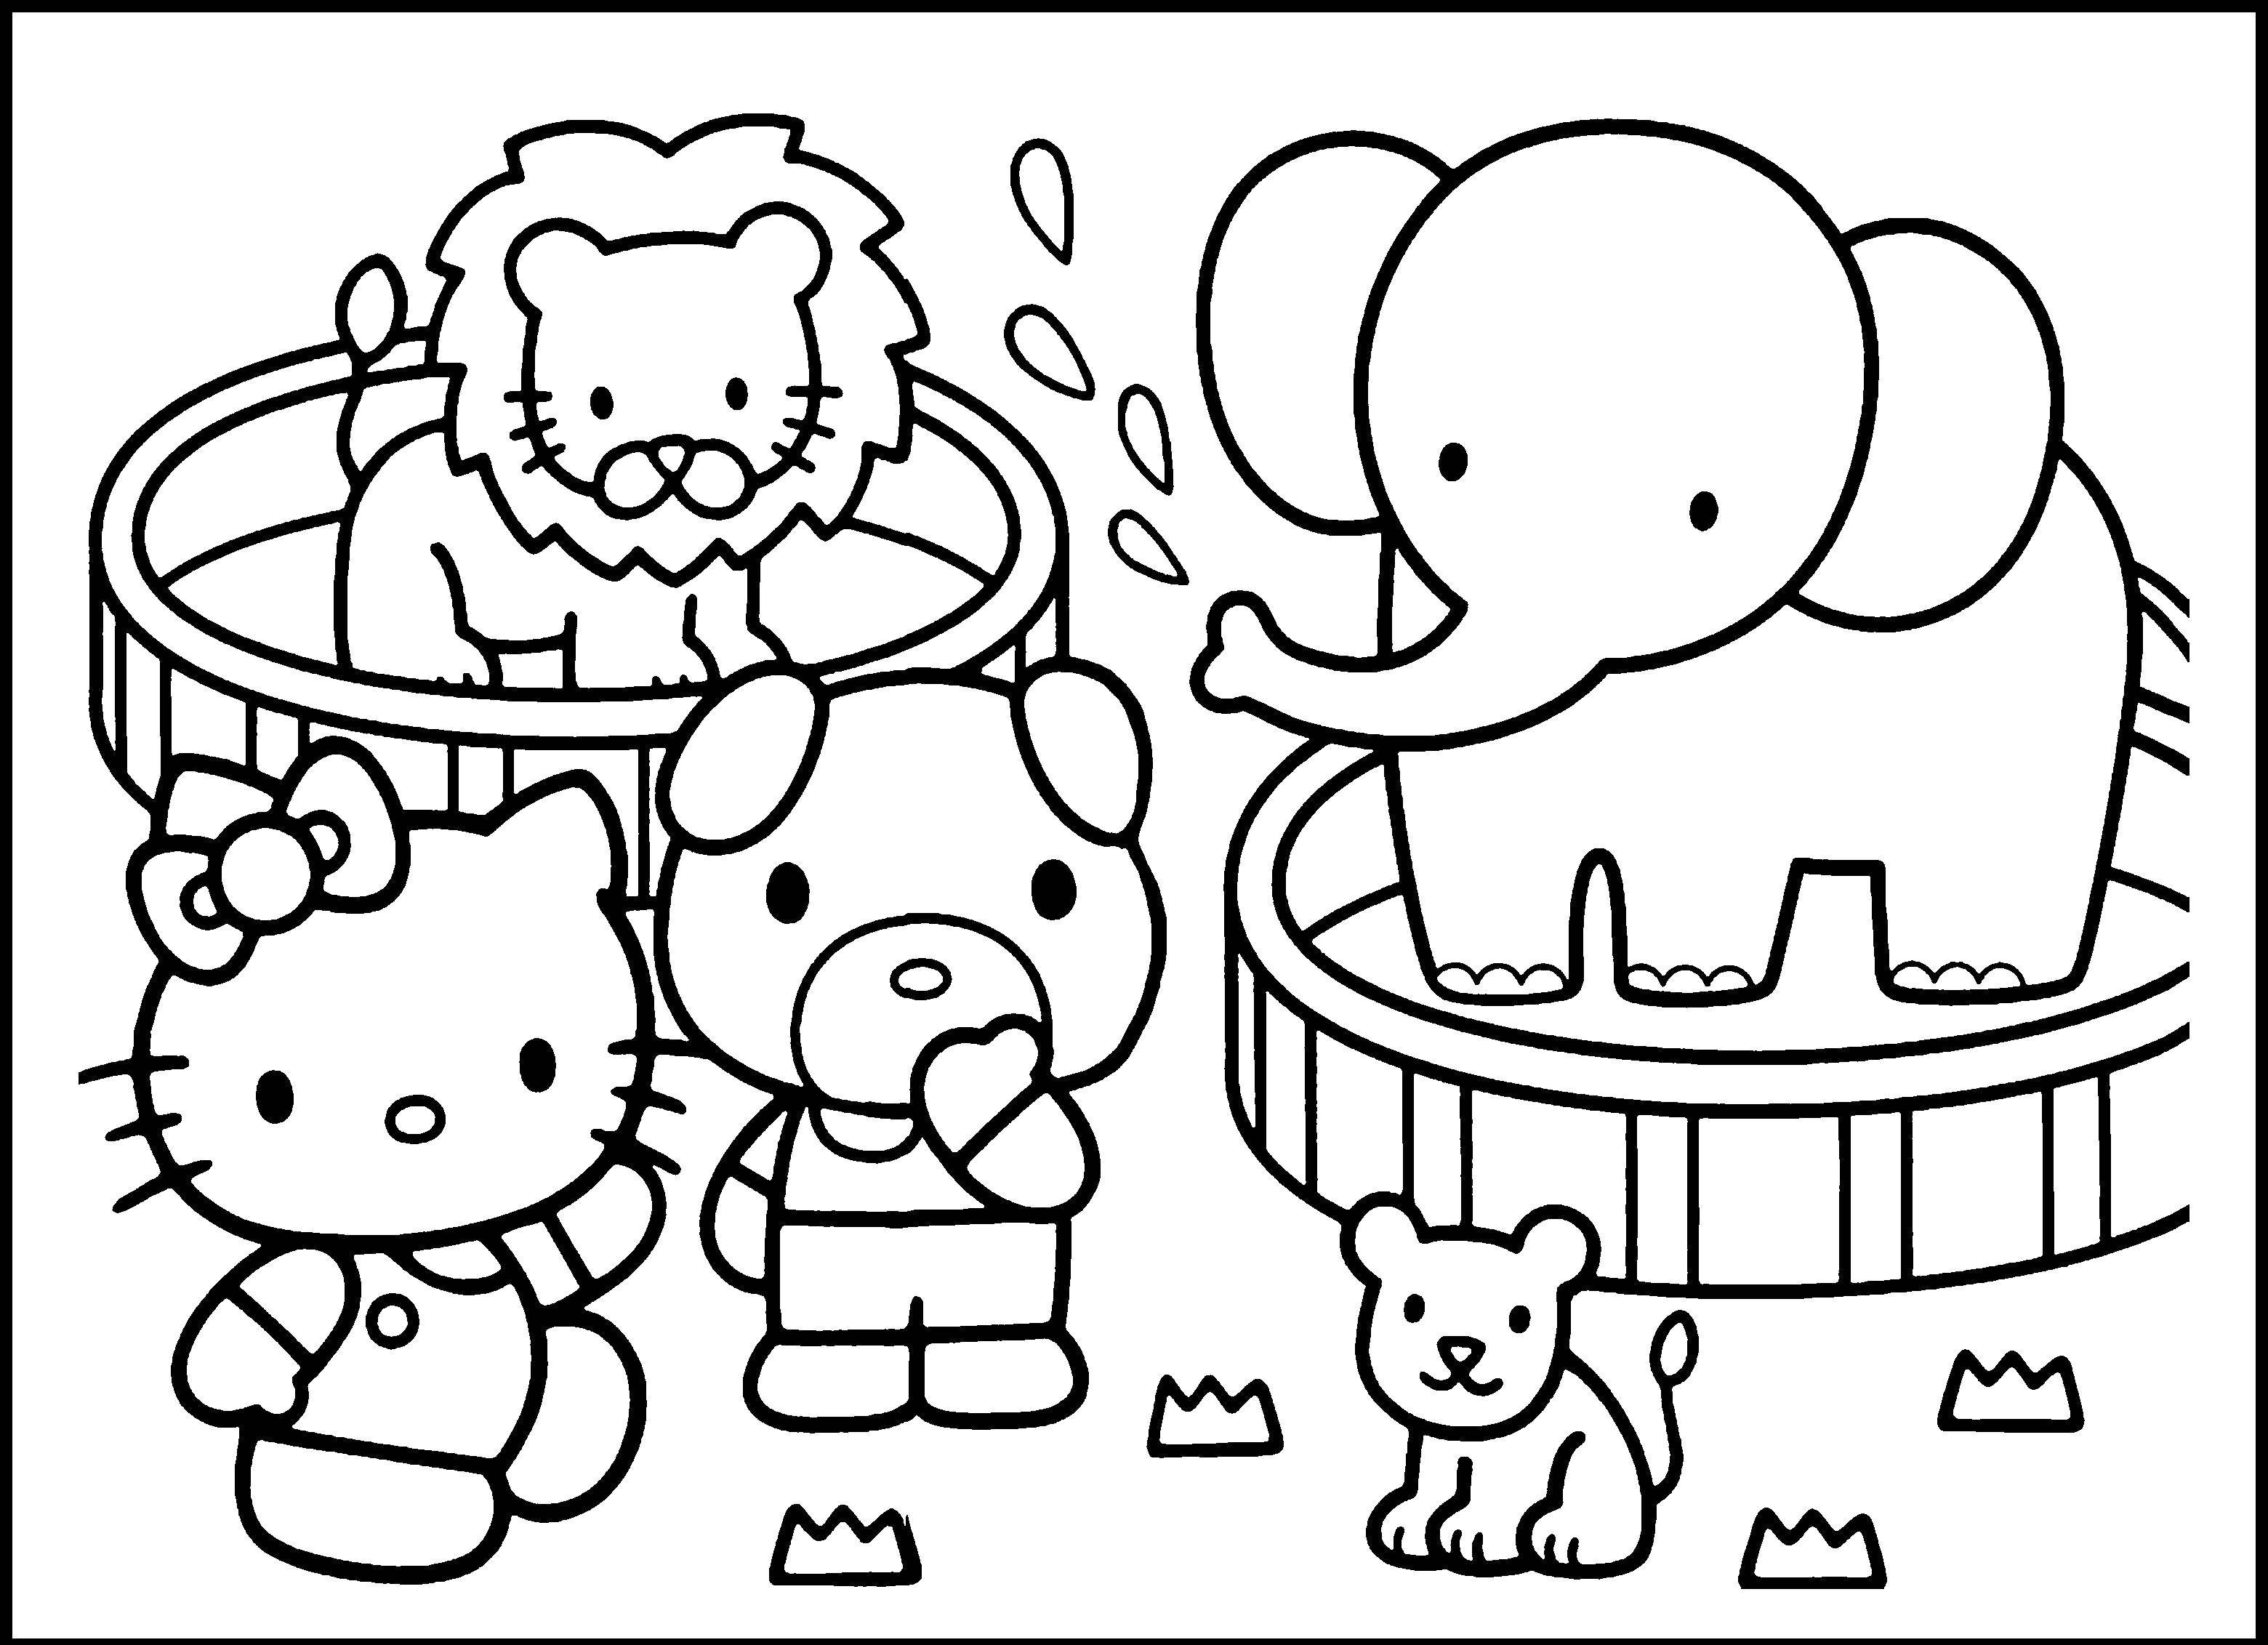 Coloring Hello kitty and various animals. Category Zoo. Tags:  Hello kitty, zoo, animals.